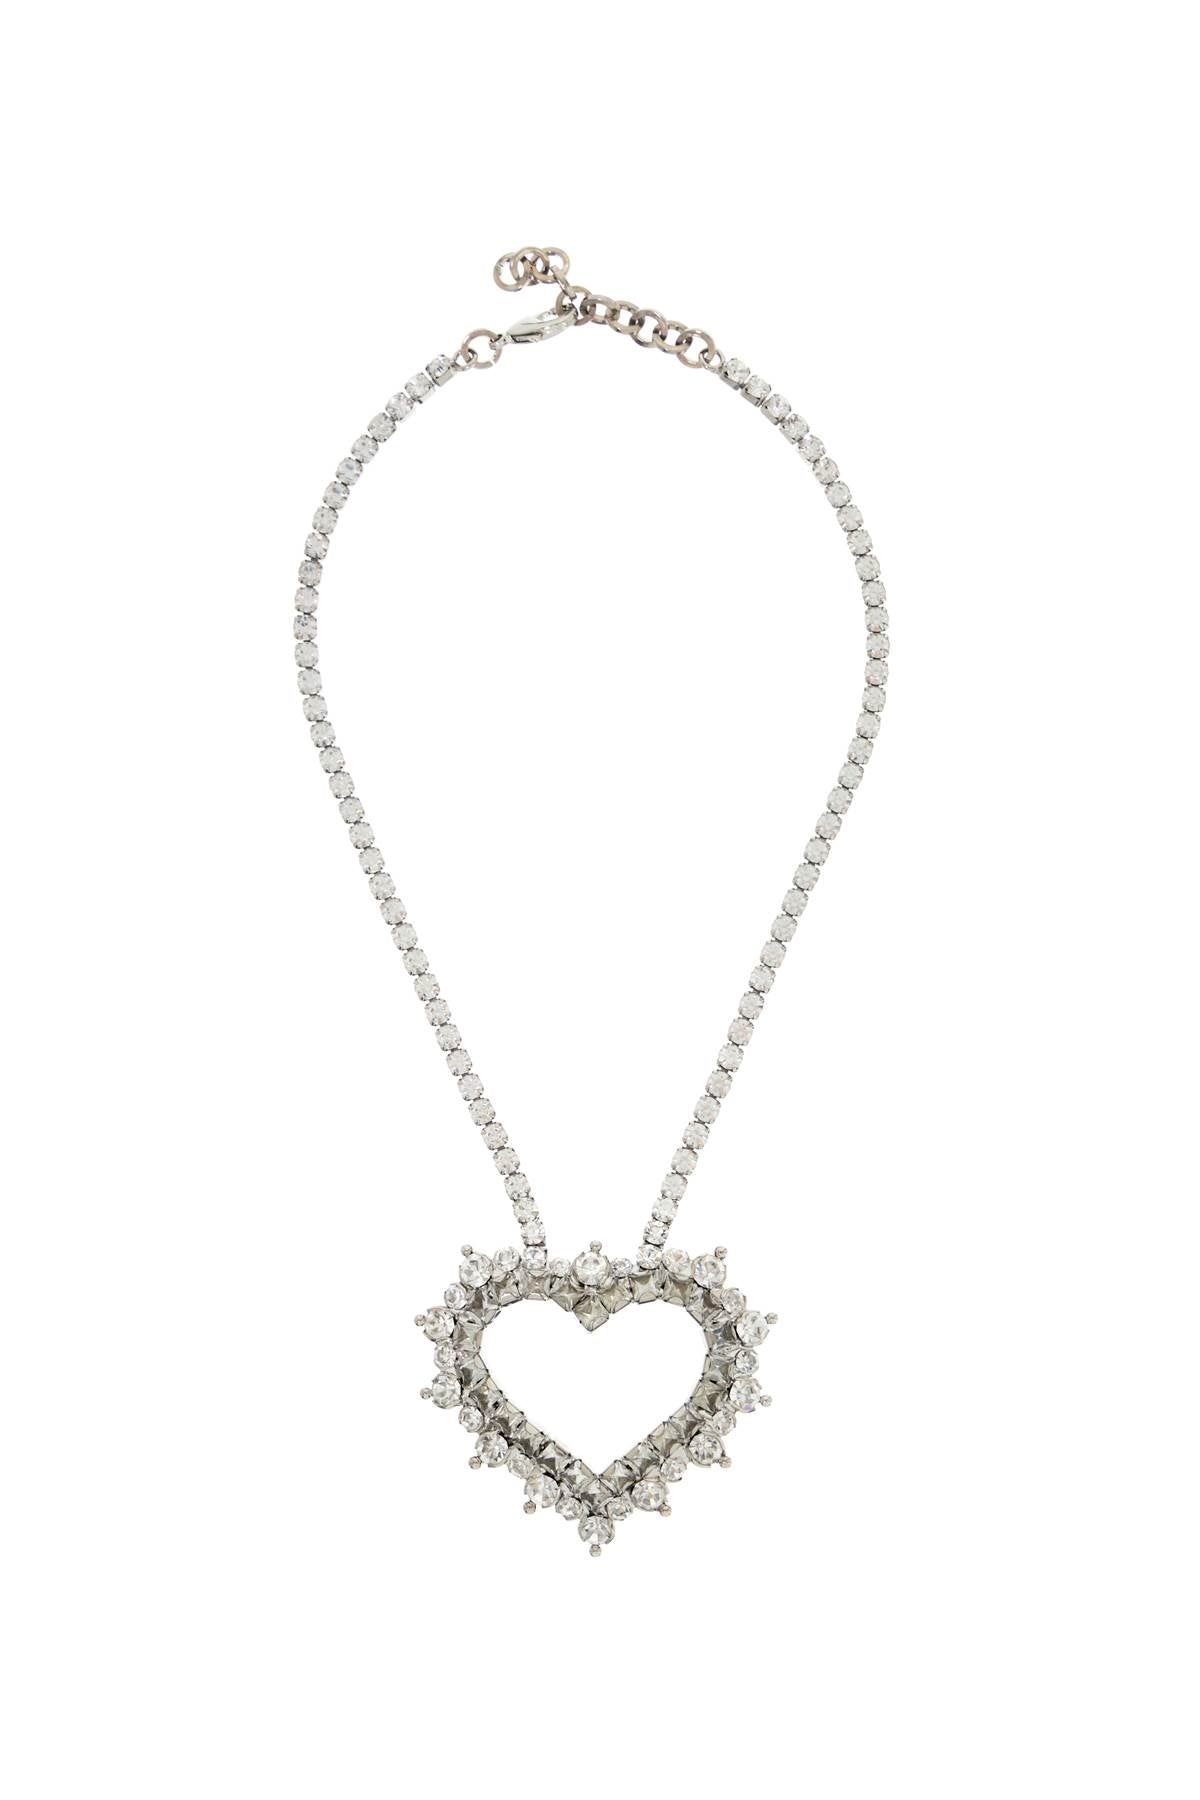 Alessandra Rich Necklace With Heart Pendant   Silver